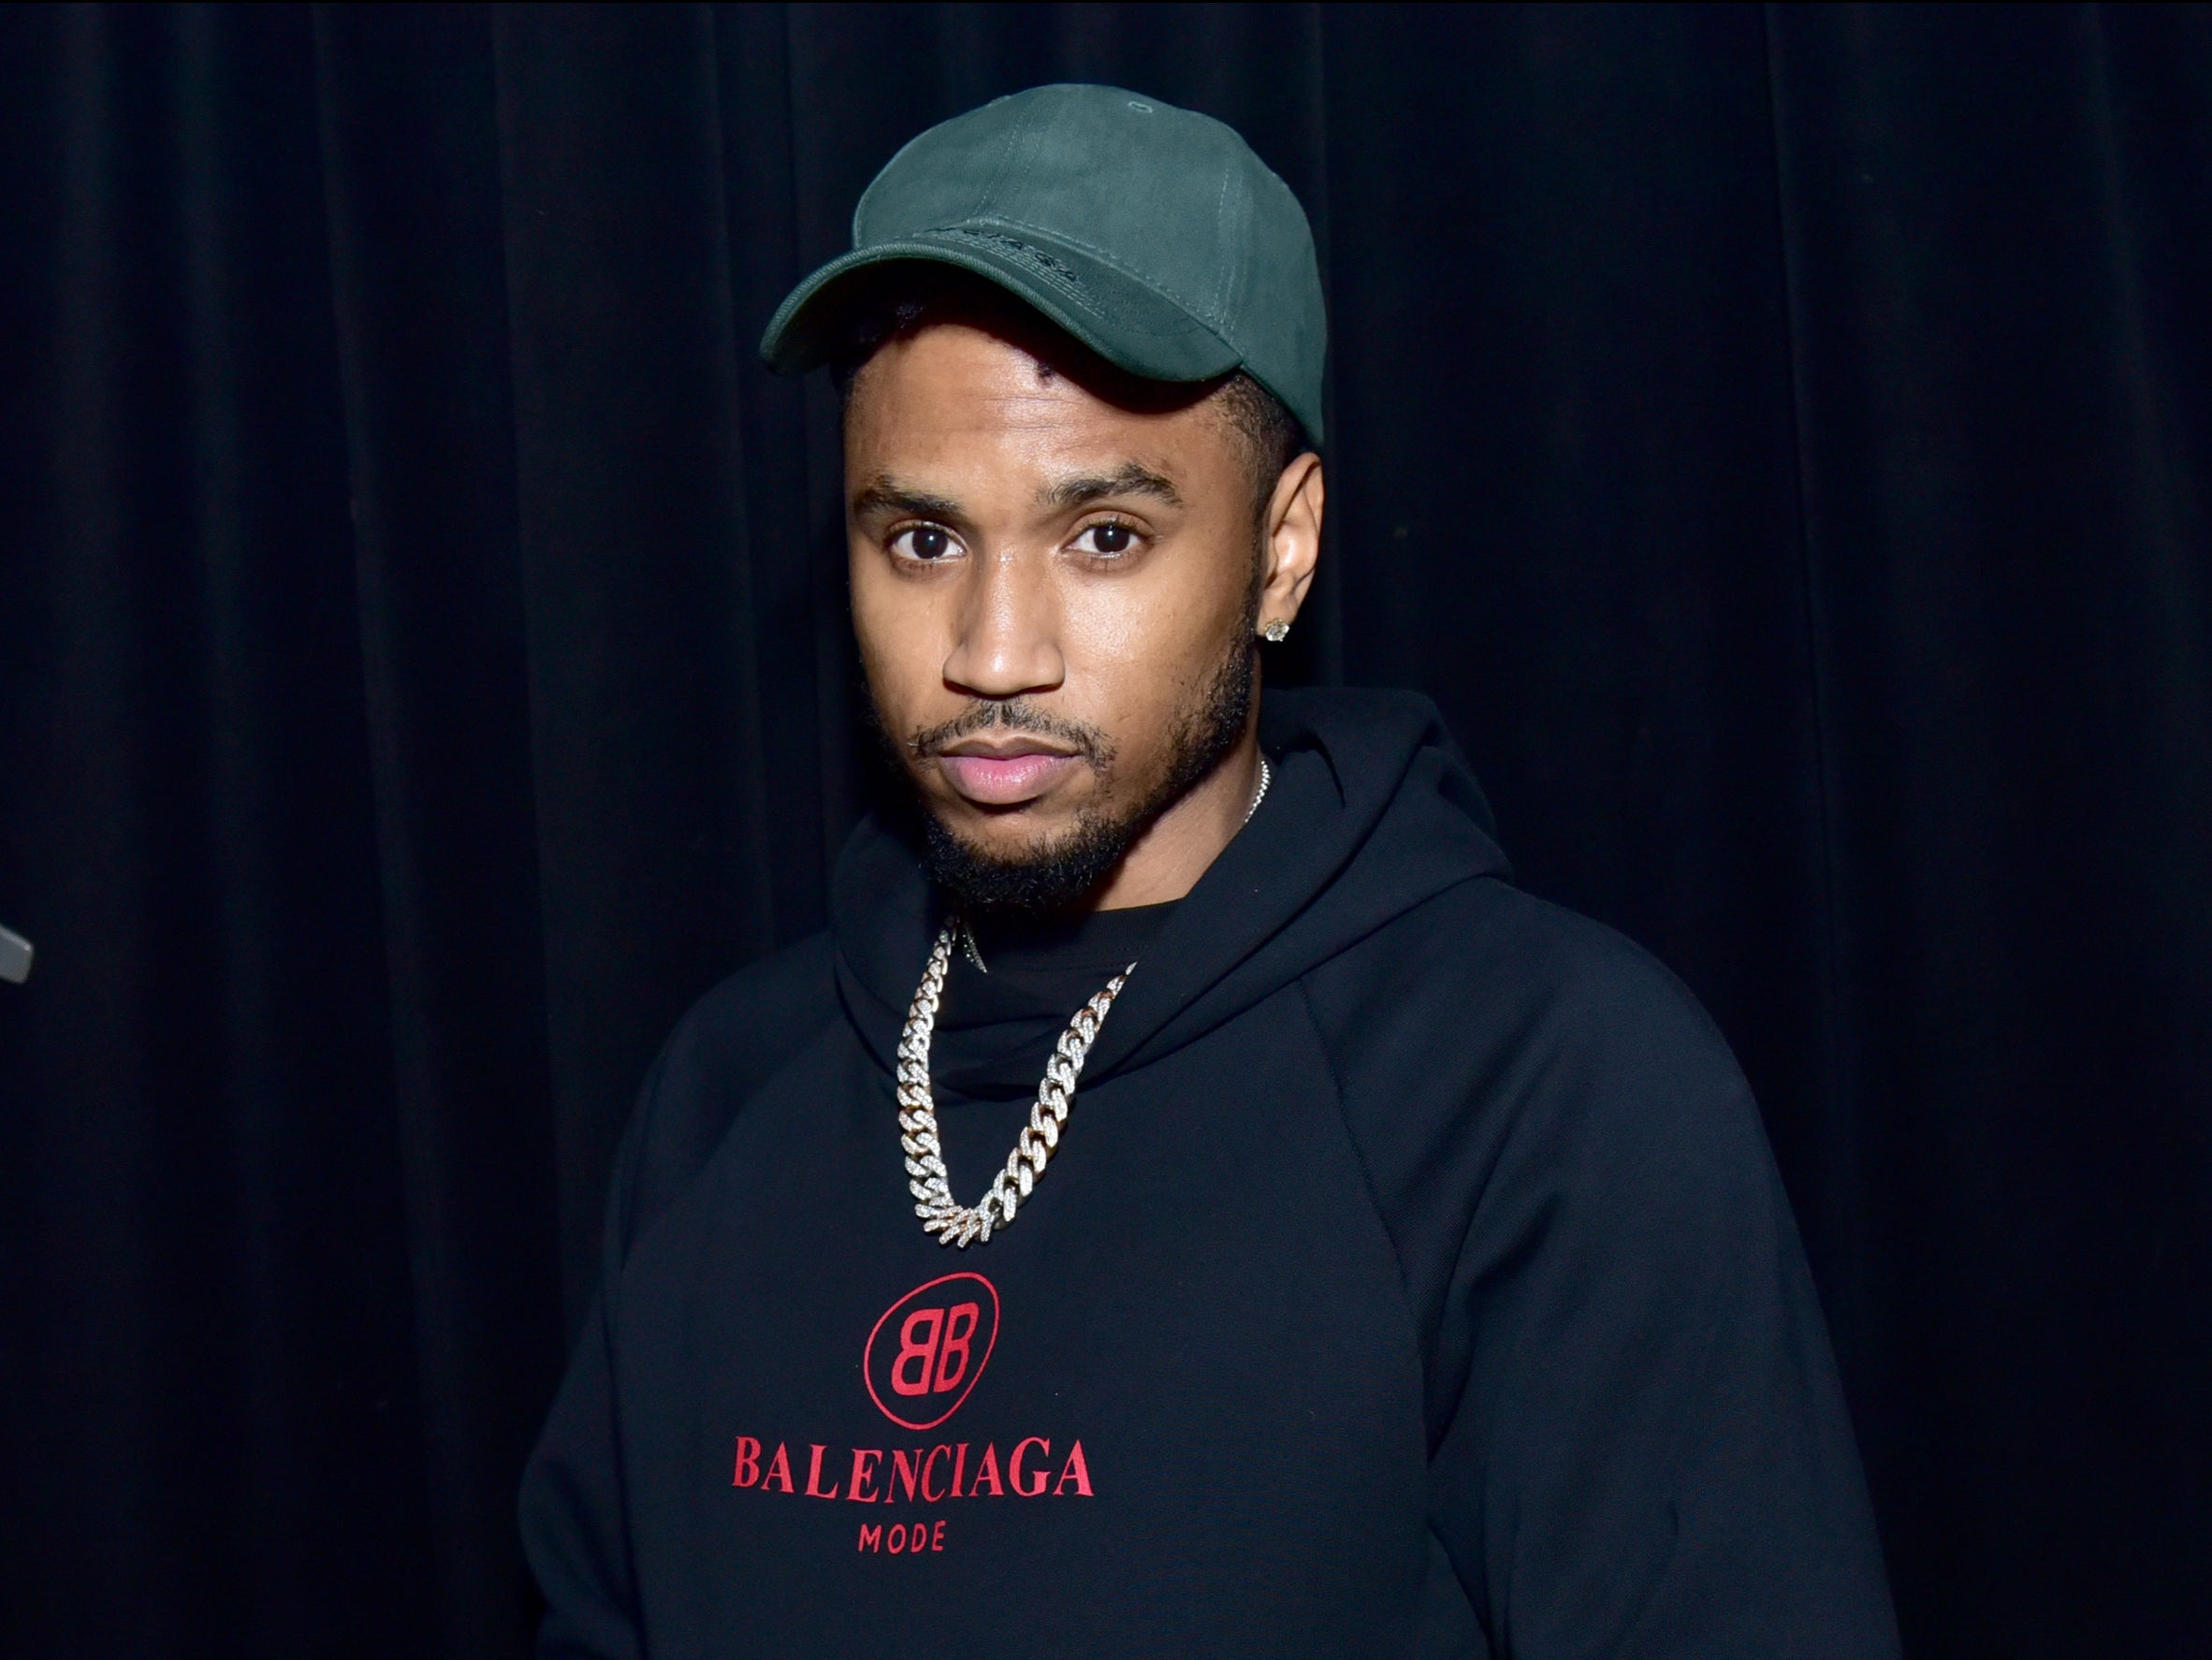 Trey Songz has been accused of raping a woman during a house party in LA